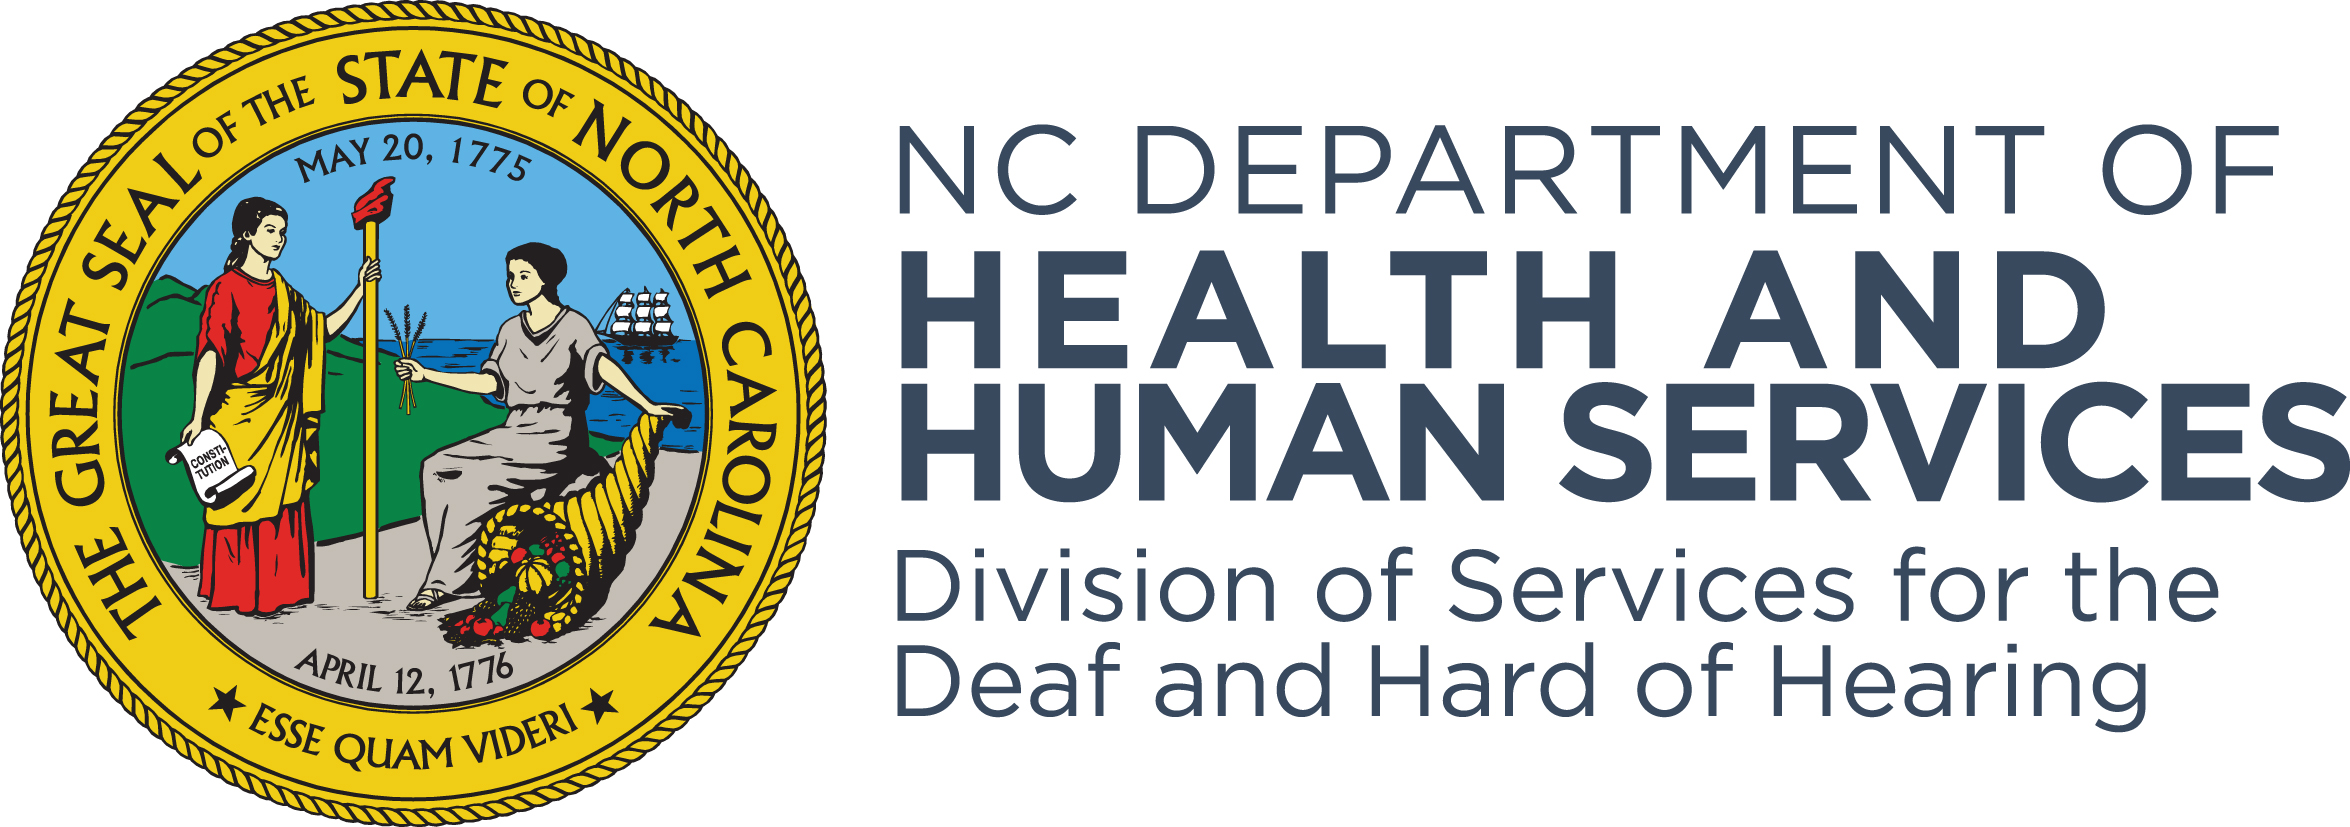 Seal of the State of North Carolina and the words NC Department of DHHS